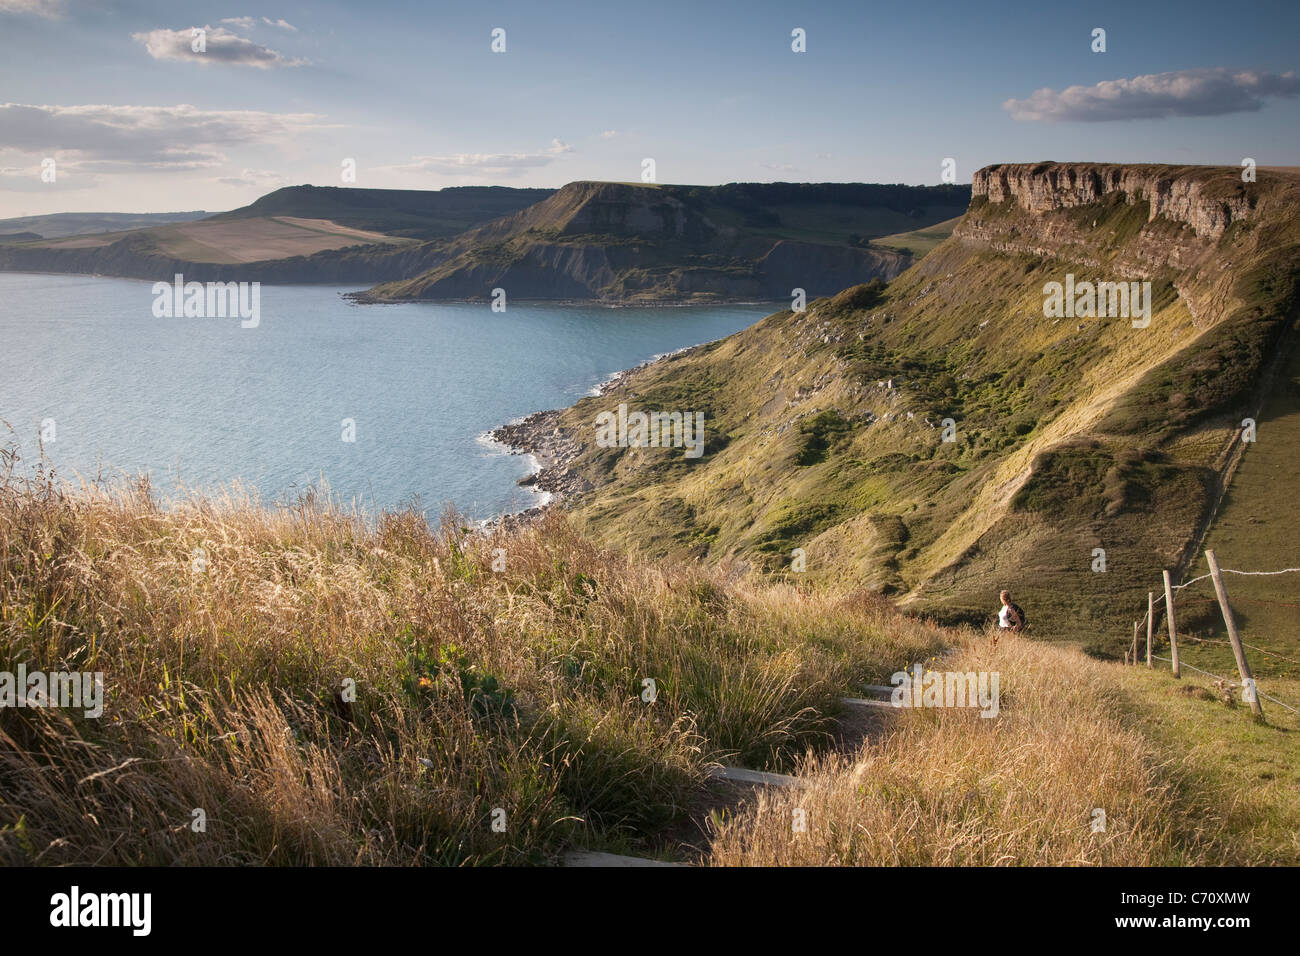 Chapmans Pool on the Jurassic Coast and Isle of Purbeck, Dorset, England, UK Stock Photo